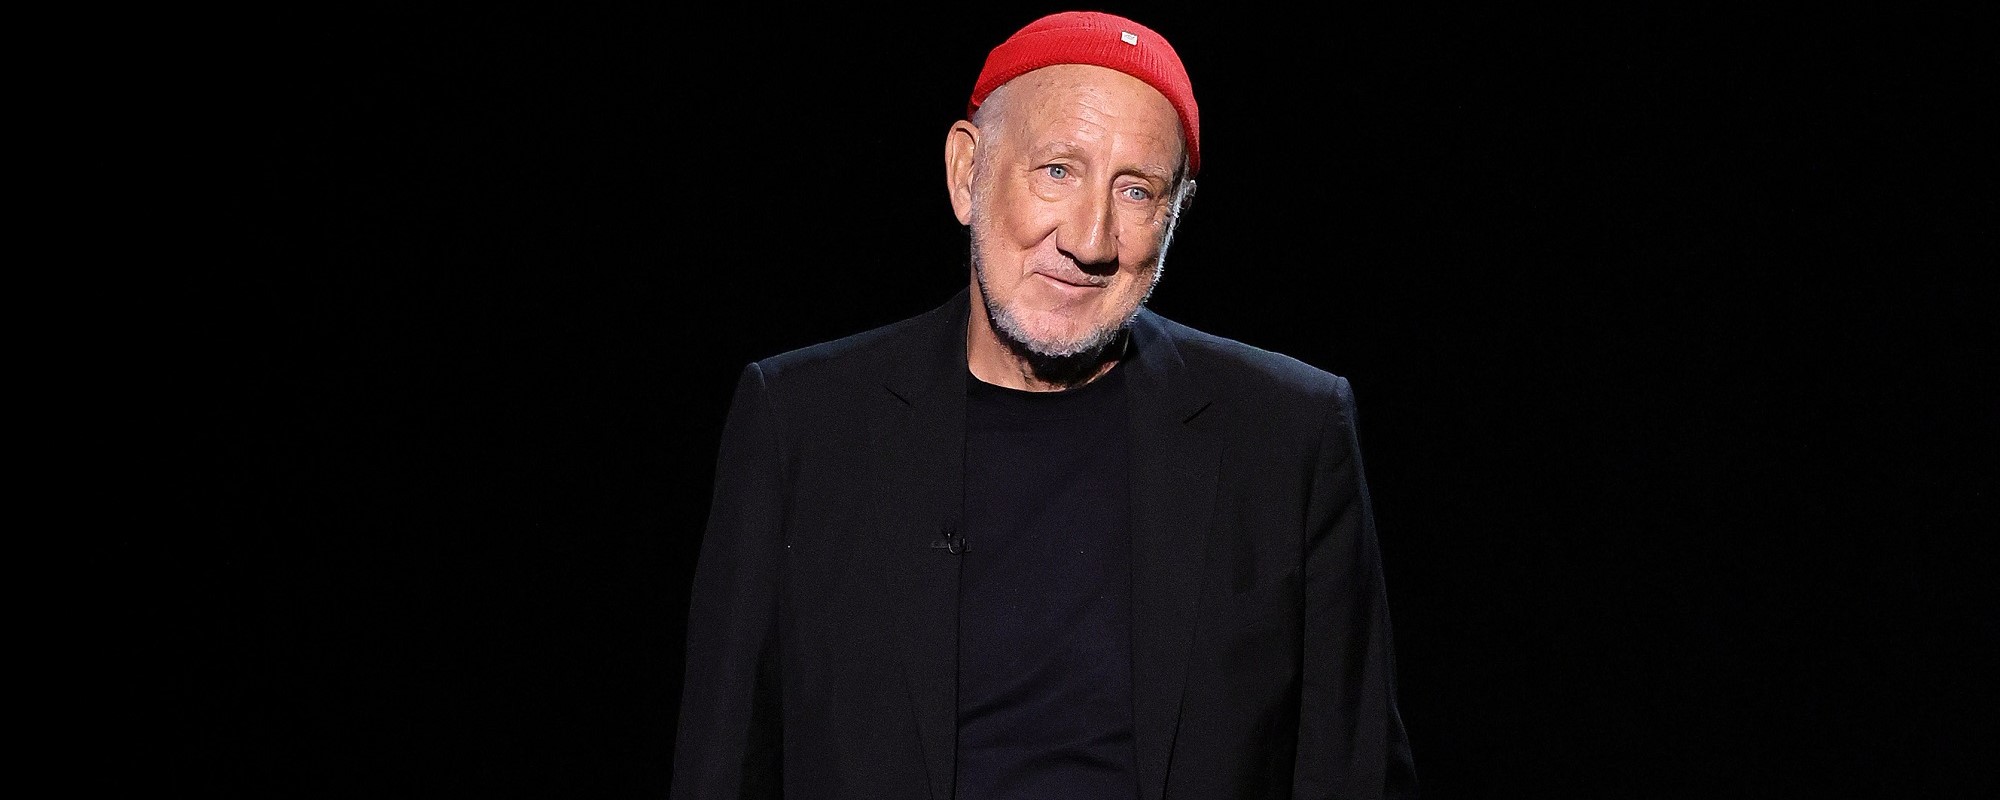 The Who’s Pete Townshend Shares the Inspiration Behind the ‘Quadrophenia’ Ballet Adaptation